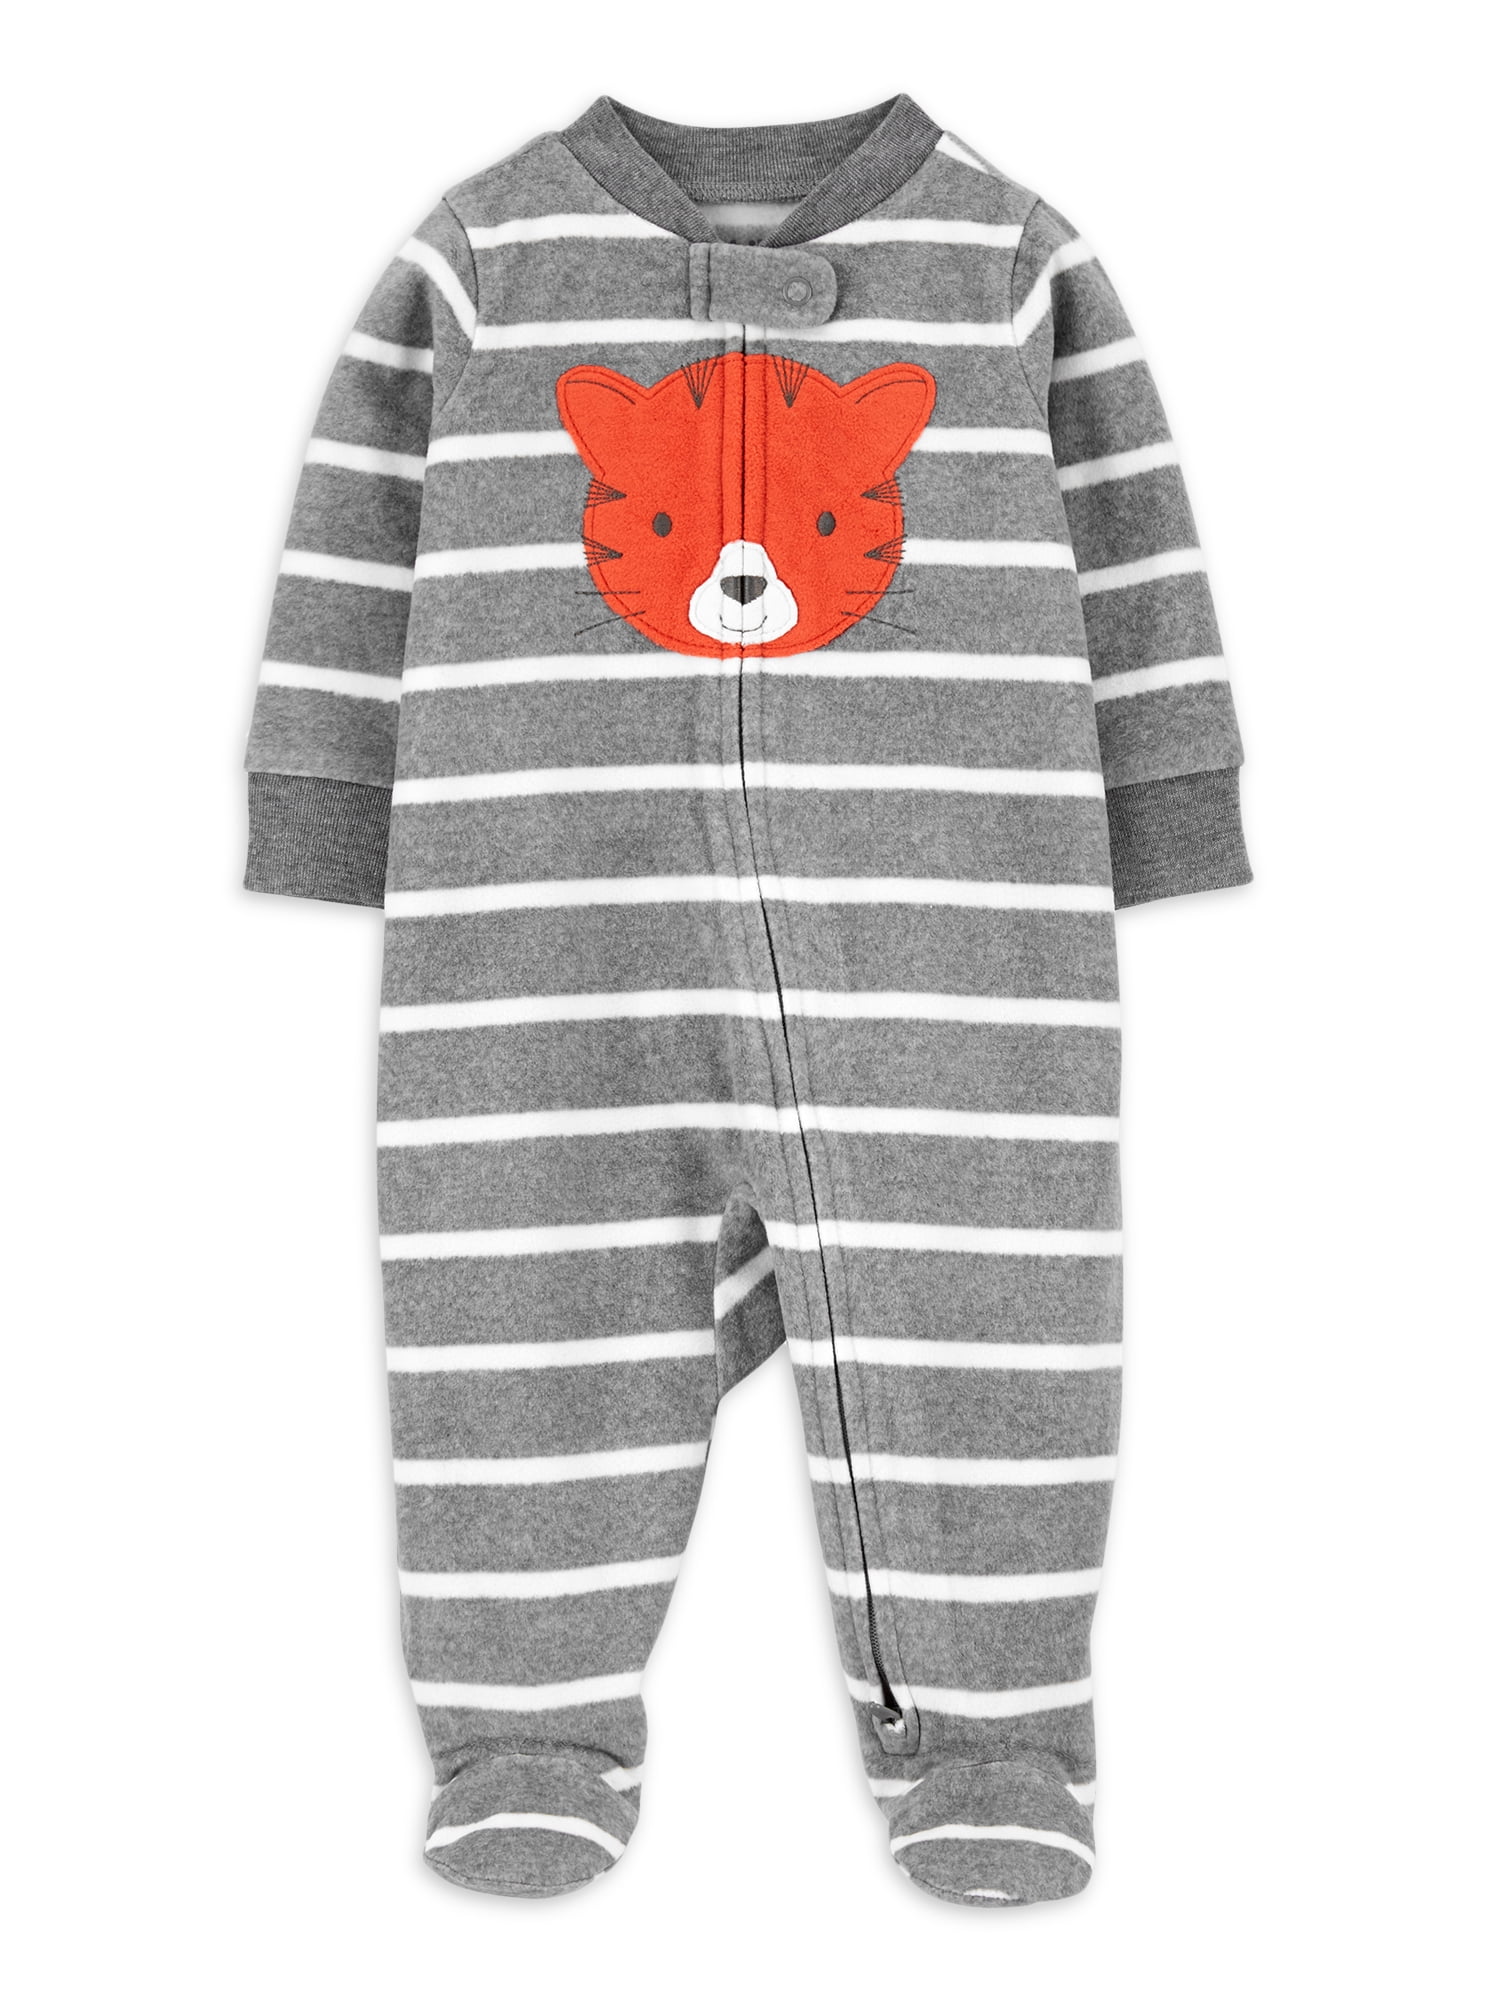 Crab Carters Baby Boys Graphic Footie 24 Months 